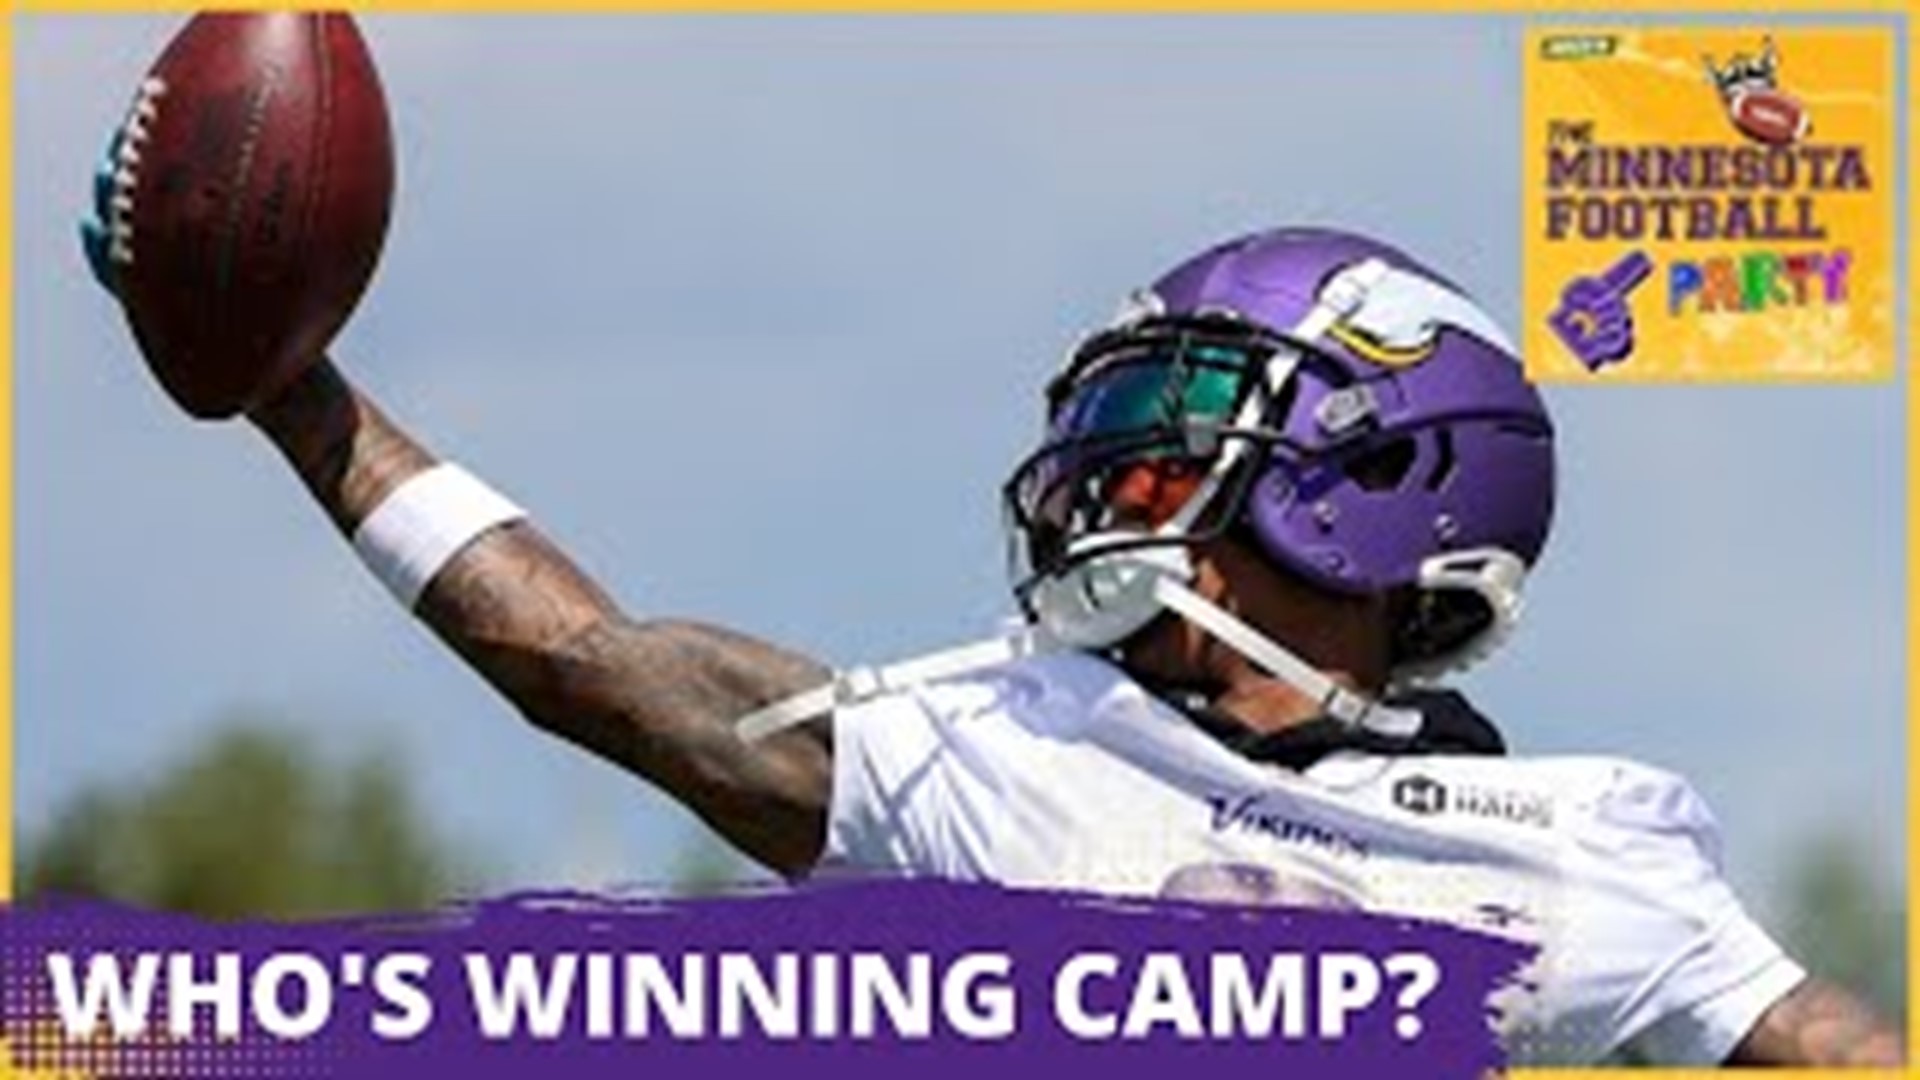 Minnesota Vikings Players With SOMETHING TO PROVE in Preseason | The Minnesota Football Party